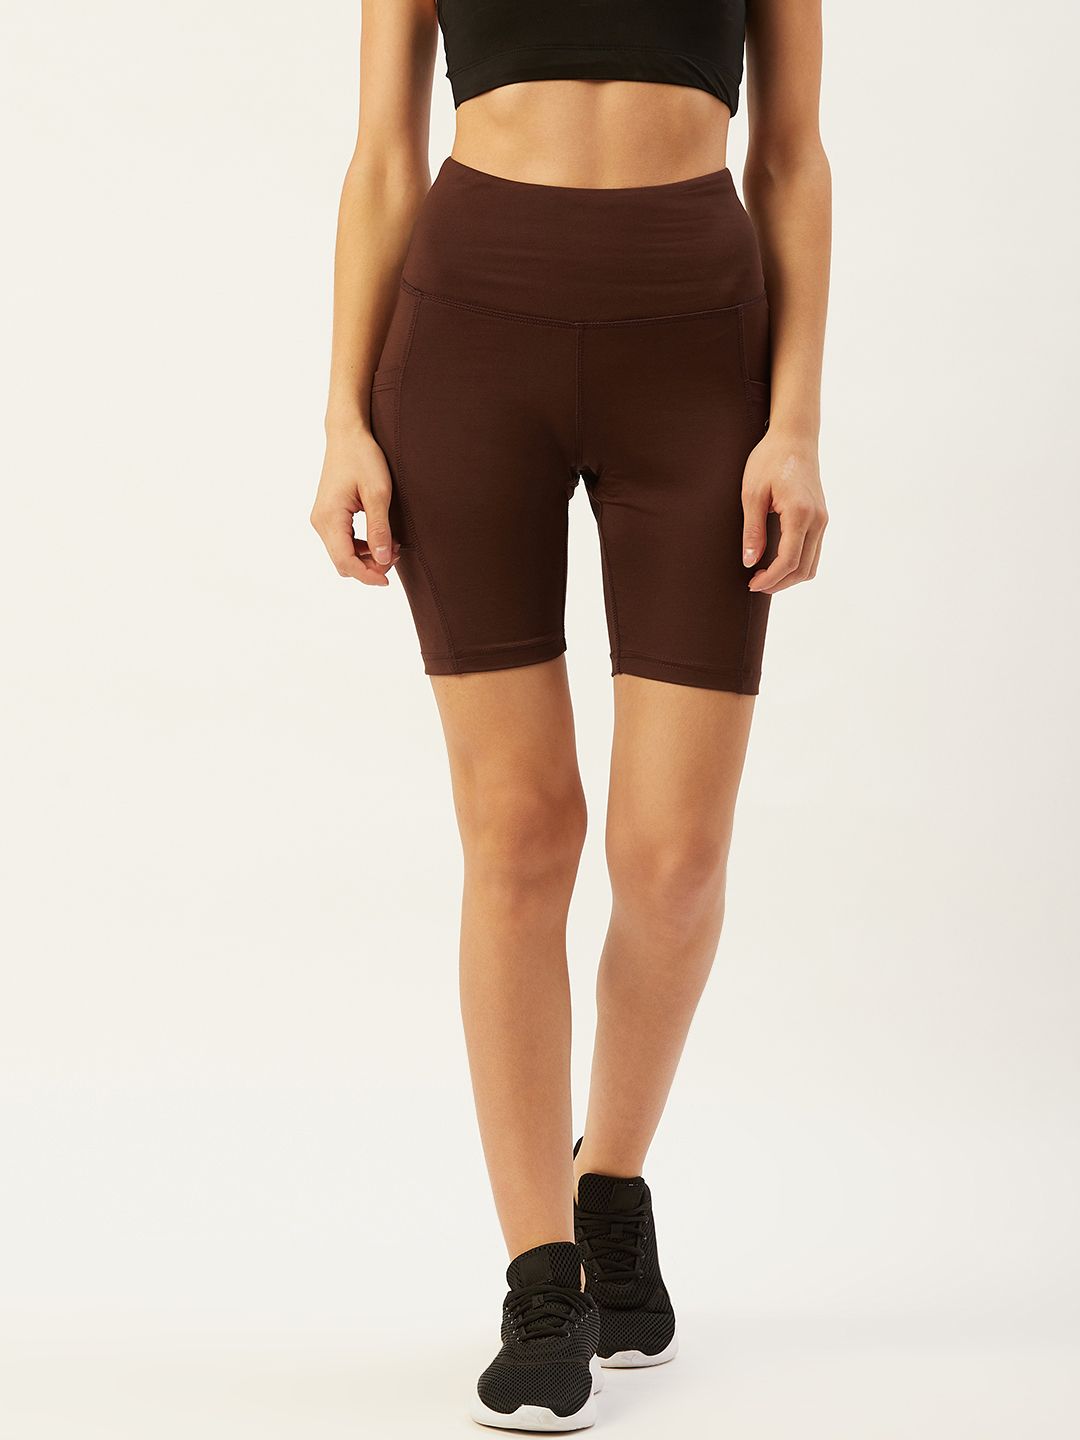 KICA Women Brown High Waisted Cycling Shorts With 2 Pockets Price in India